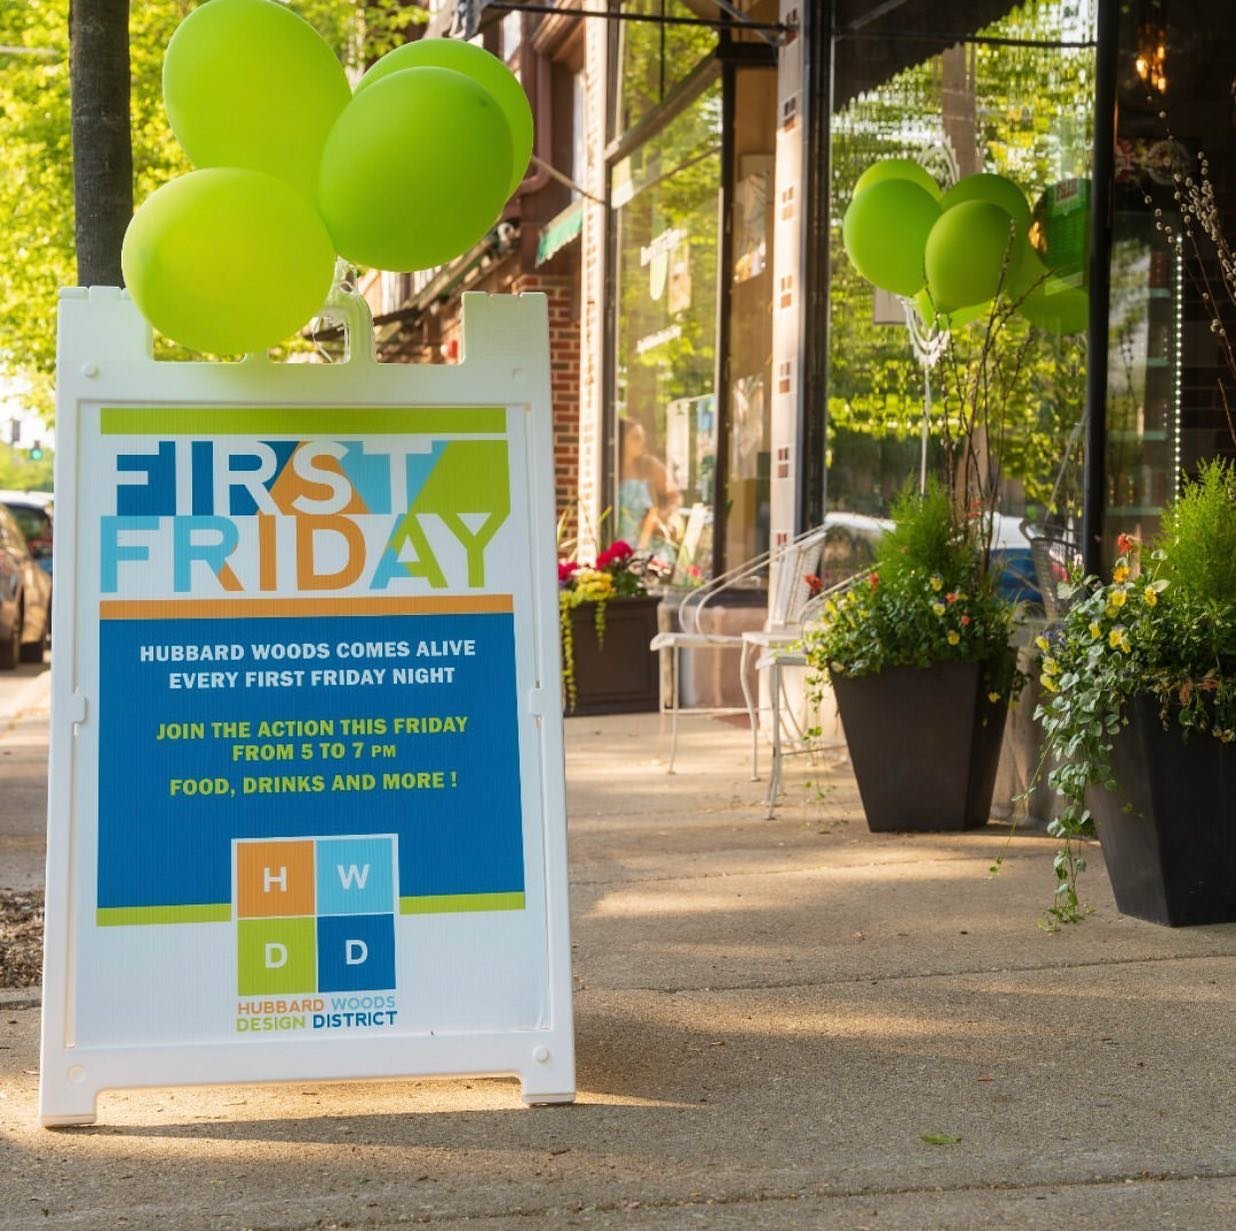 TOMORROW!!
Join Hubbard Woods for September&rsquo;s First Friday 5pm-7pm!
.
.
.
.
#firstfriday #hubbardwoods #hwdd_winnetka #winnetka #chicago #chicagonorthshore #shoplocal